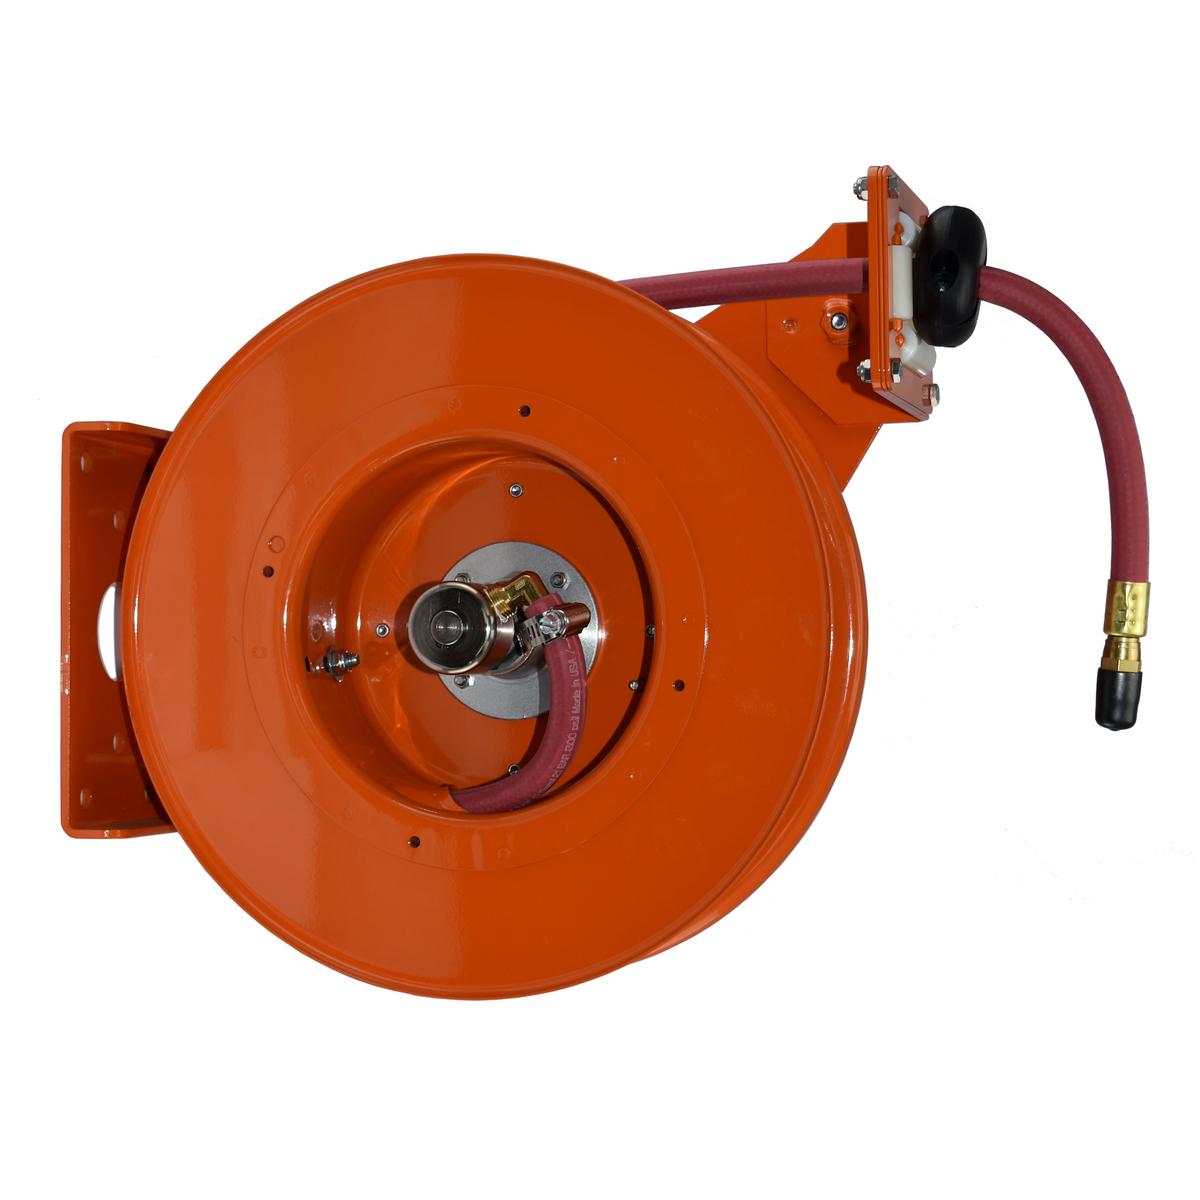 Hubbell HM141-6-P4 The Gleason Hose-Master hose reel is the most rugged single hose, general purpose hose reel of its size in the industry. We created it with the most demanding hose reeling applications in mind, hand pull or machine mounted. Oversized bearings and a heavy 